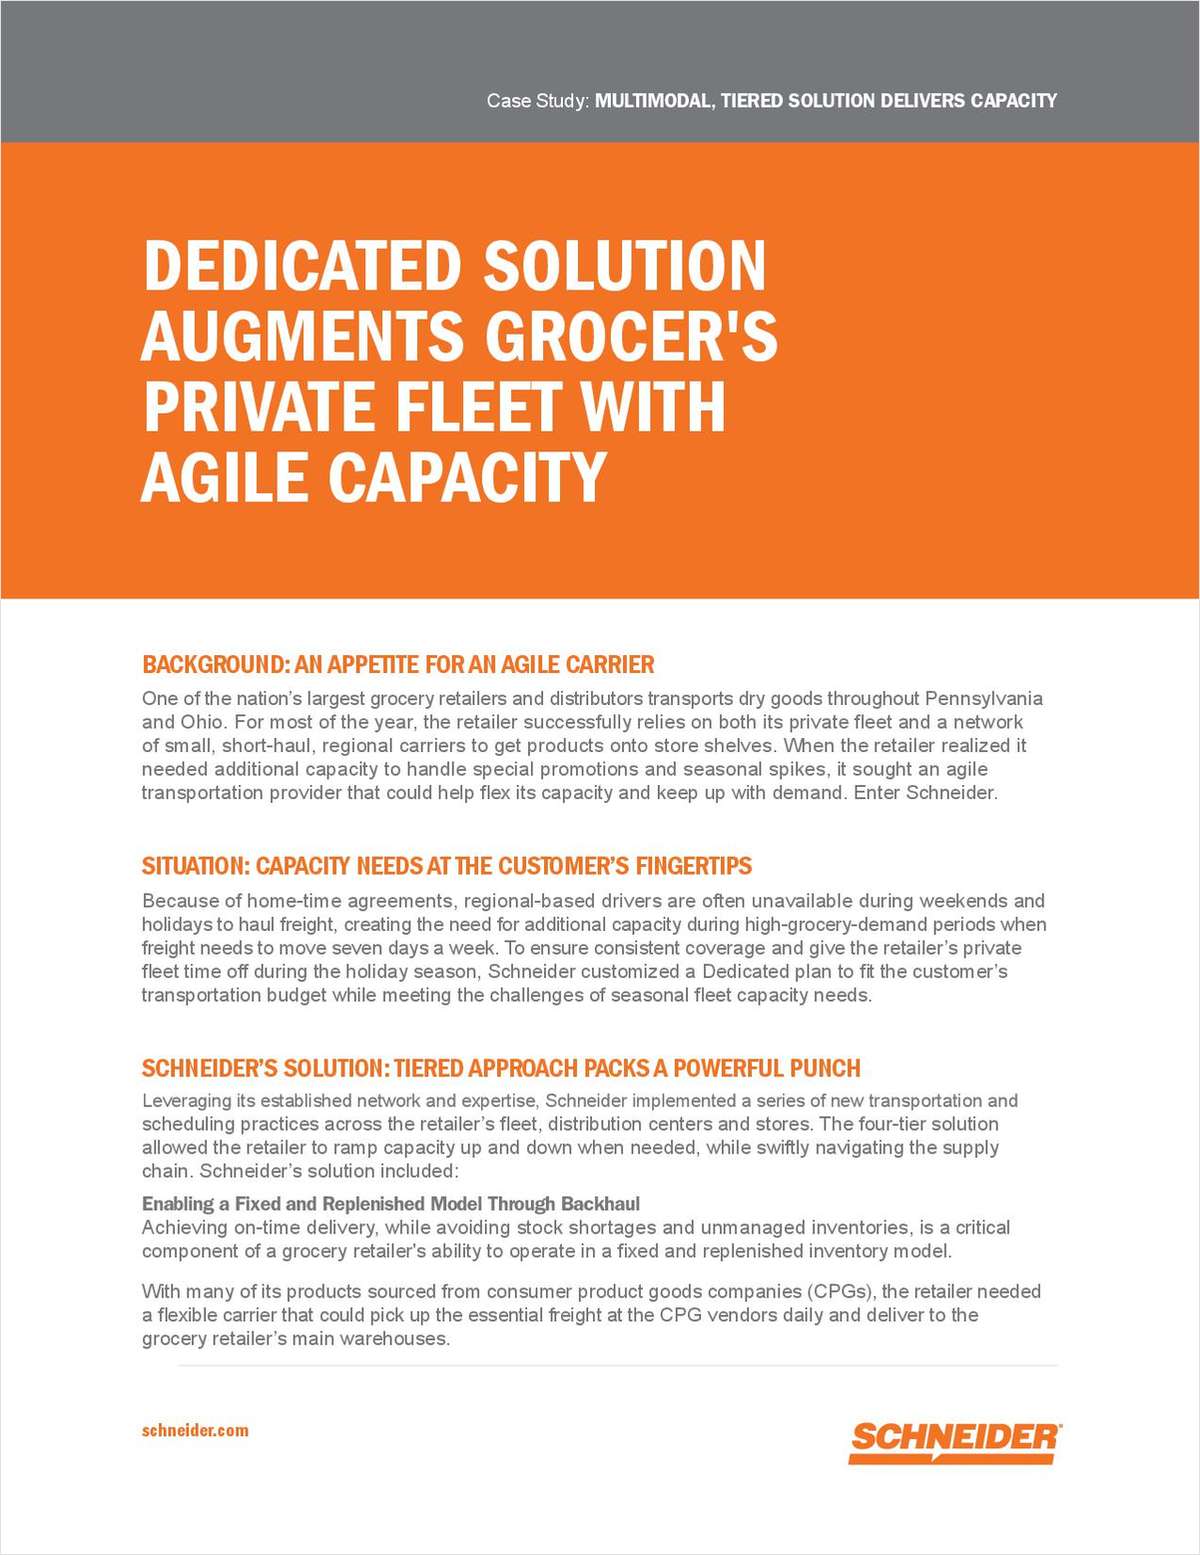 Dedicated Solution Augments Grocer's Private Fleet with Agile Capacity